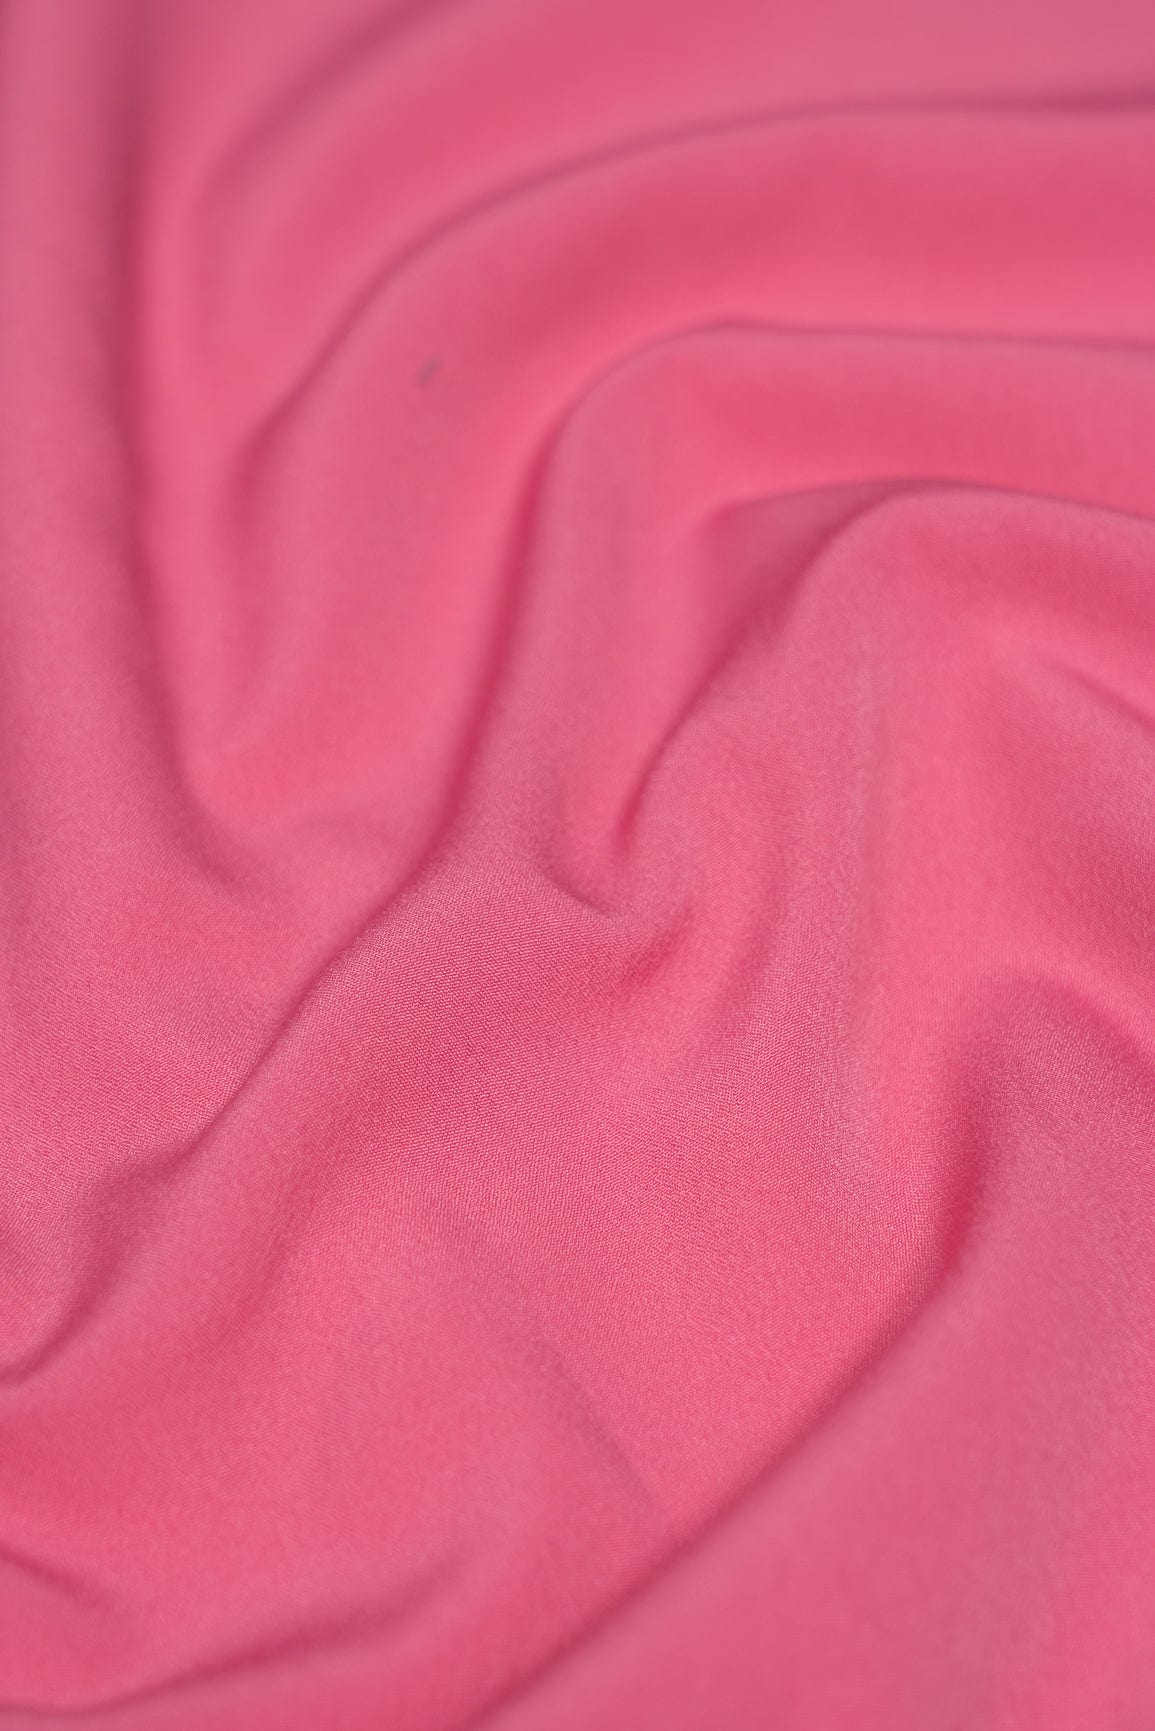 Pink Dyed Crepe Fabric - doeraa